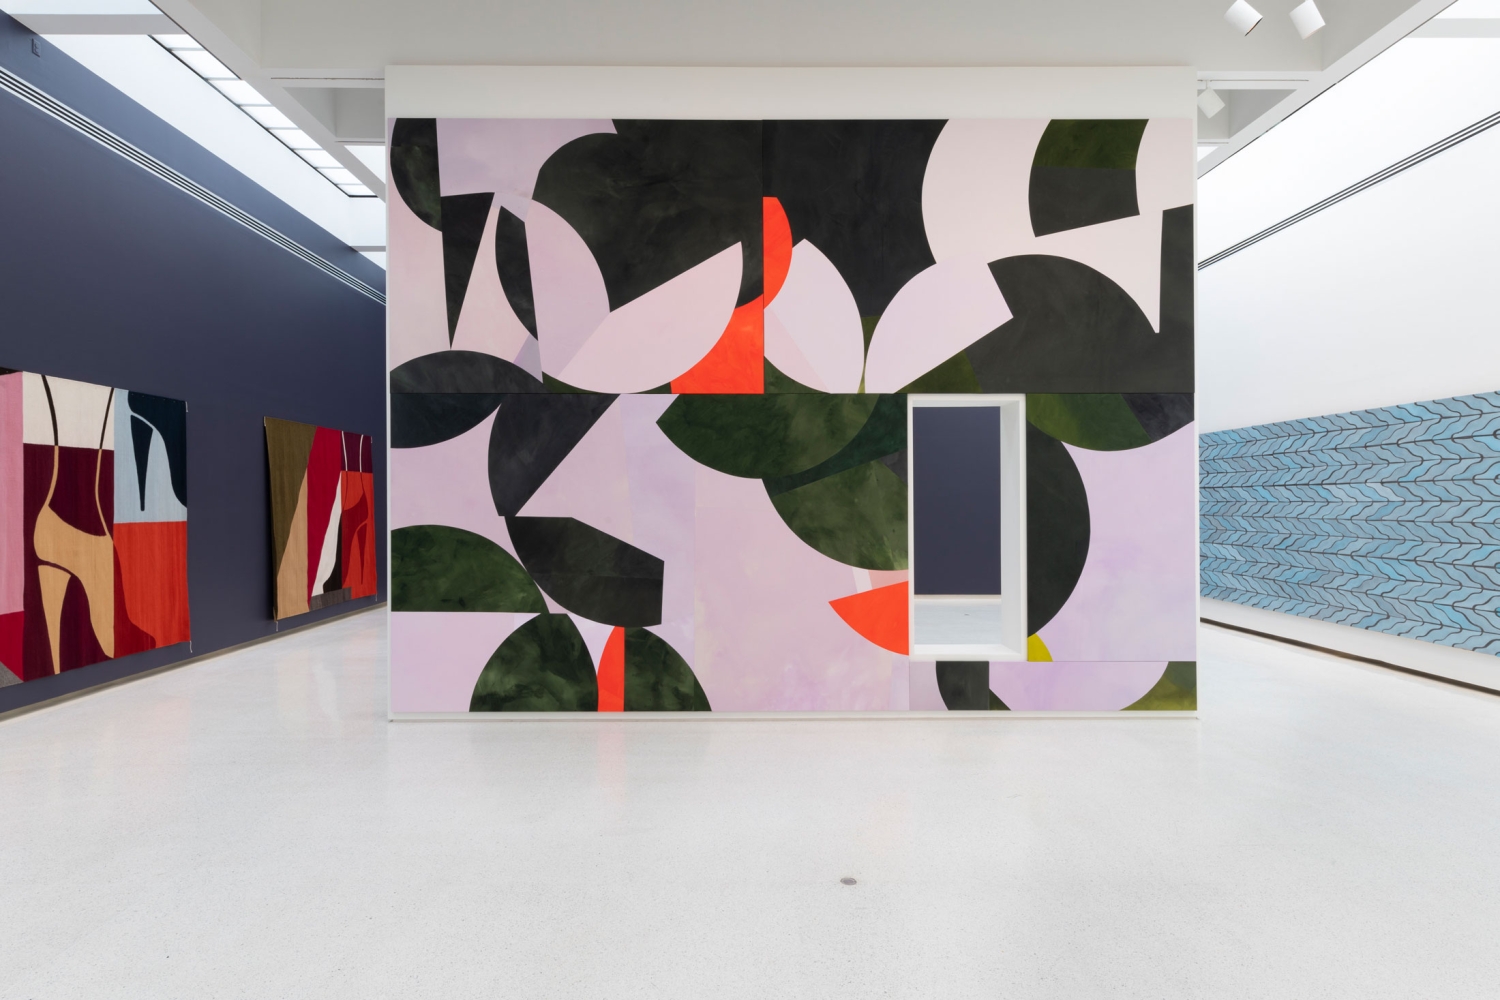 Sarah Crowner
Carnegie International: 57th Edition
Installation view
October 13, 2018 - March 25, 2019
Carnegie Museum of Art, Pittsburgh, PA